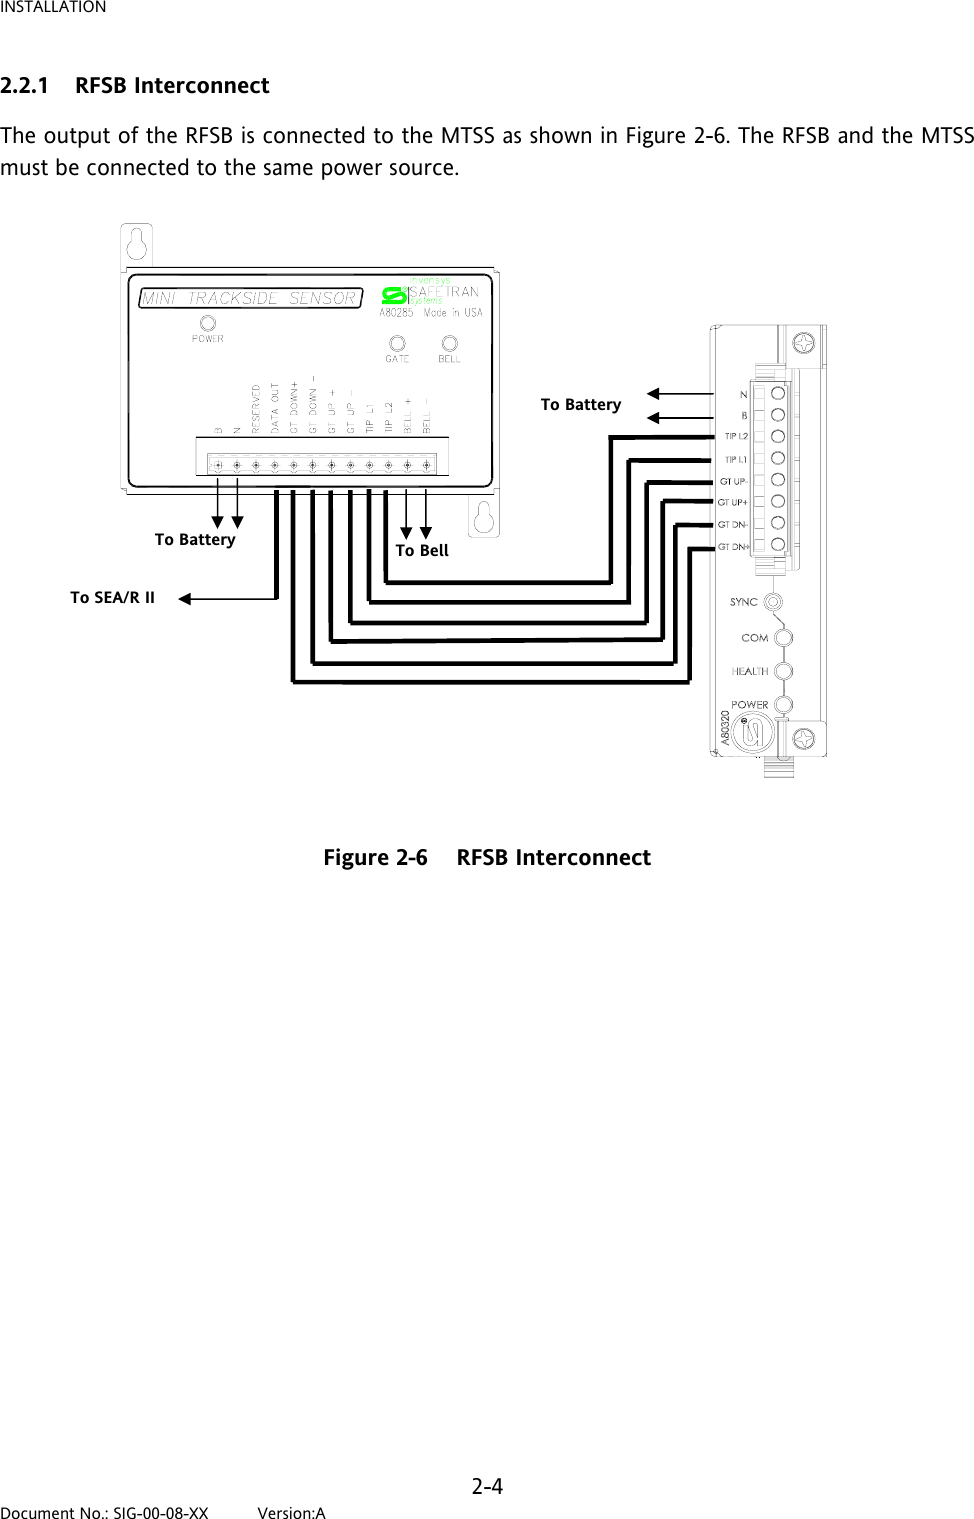 INSTALLATION 2.2.1 RFSB Interconnect The output of the RFSB is connected to the MTSS as shown in Figure 2-6. The RFSB and the MTSS must be connected to the same power source. To Battery To Battery To SEA/R II To Bell  Figure 2-6    RFSB Interconnect   2-4 Document No.: SIG-00-08-XX          Version:A 